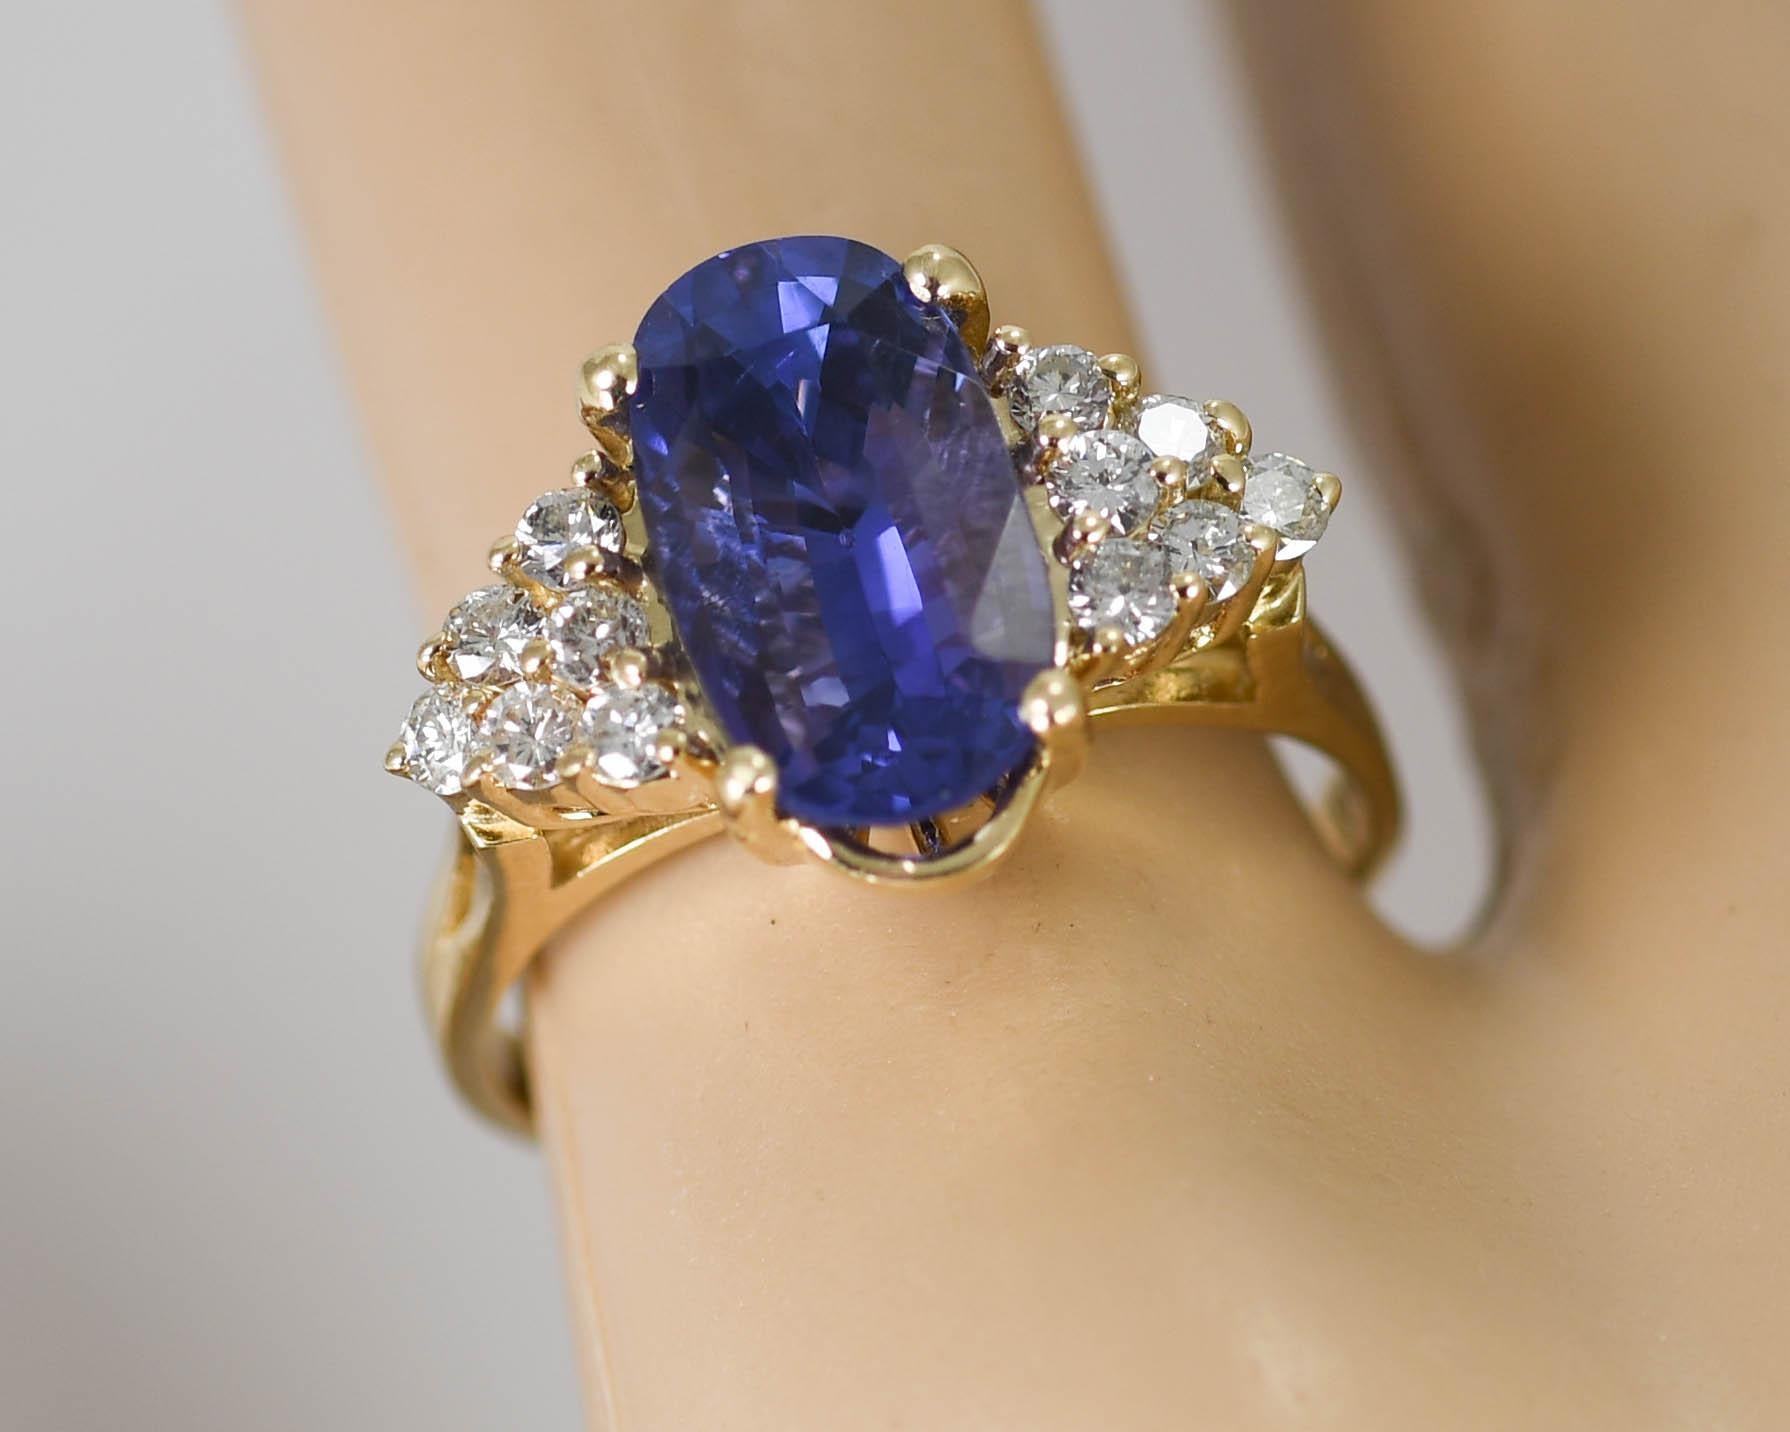 Ladies violet-blue sapphire and diamond ring in 14k yellow gold setting.
Stamped 14k and weighs 4.9 grams.
The oval sapphire weighs 4.86 carats,  modified brilliant cut.
The color is an excellent violet-blue color, no heat treatment.
The GIA grading